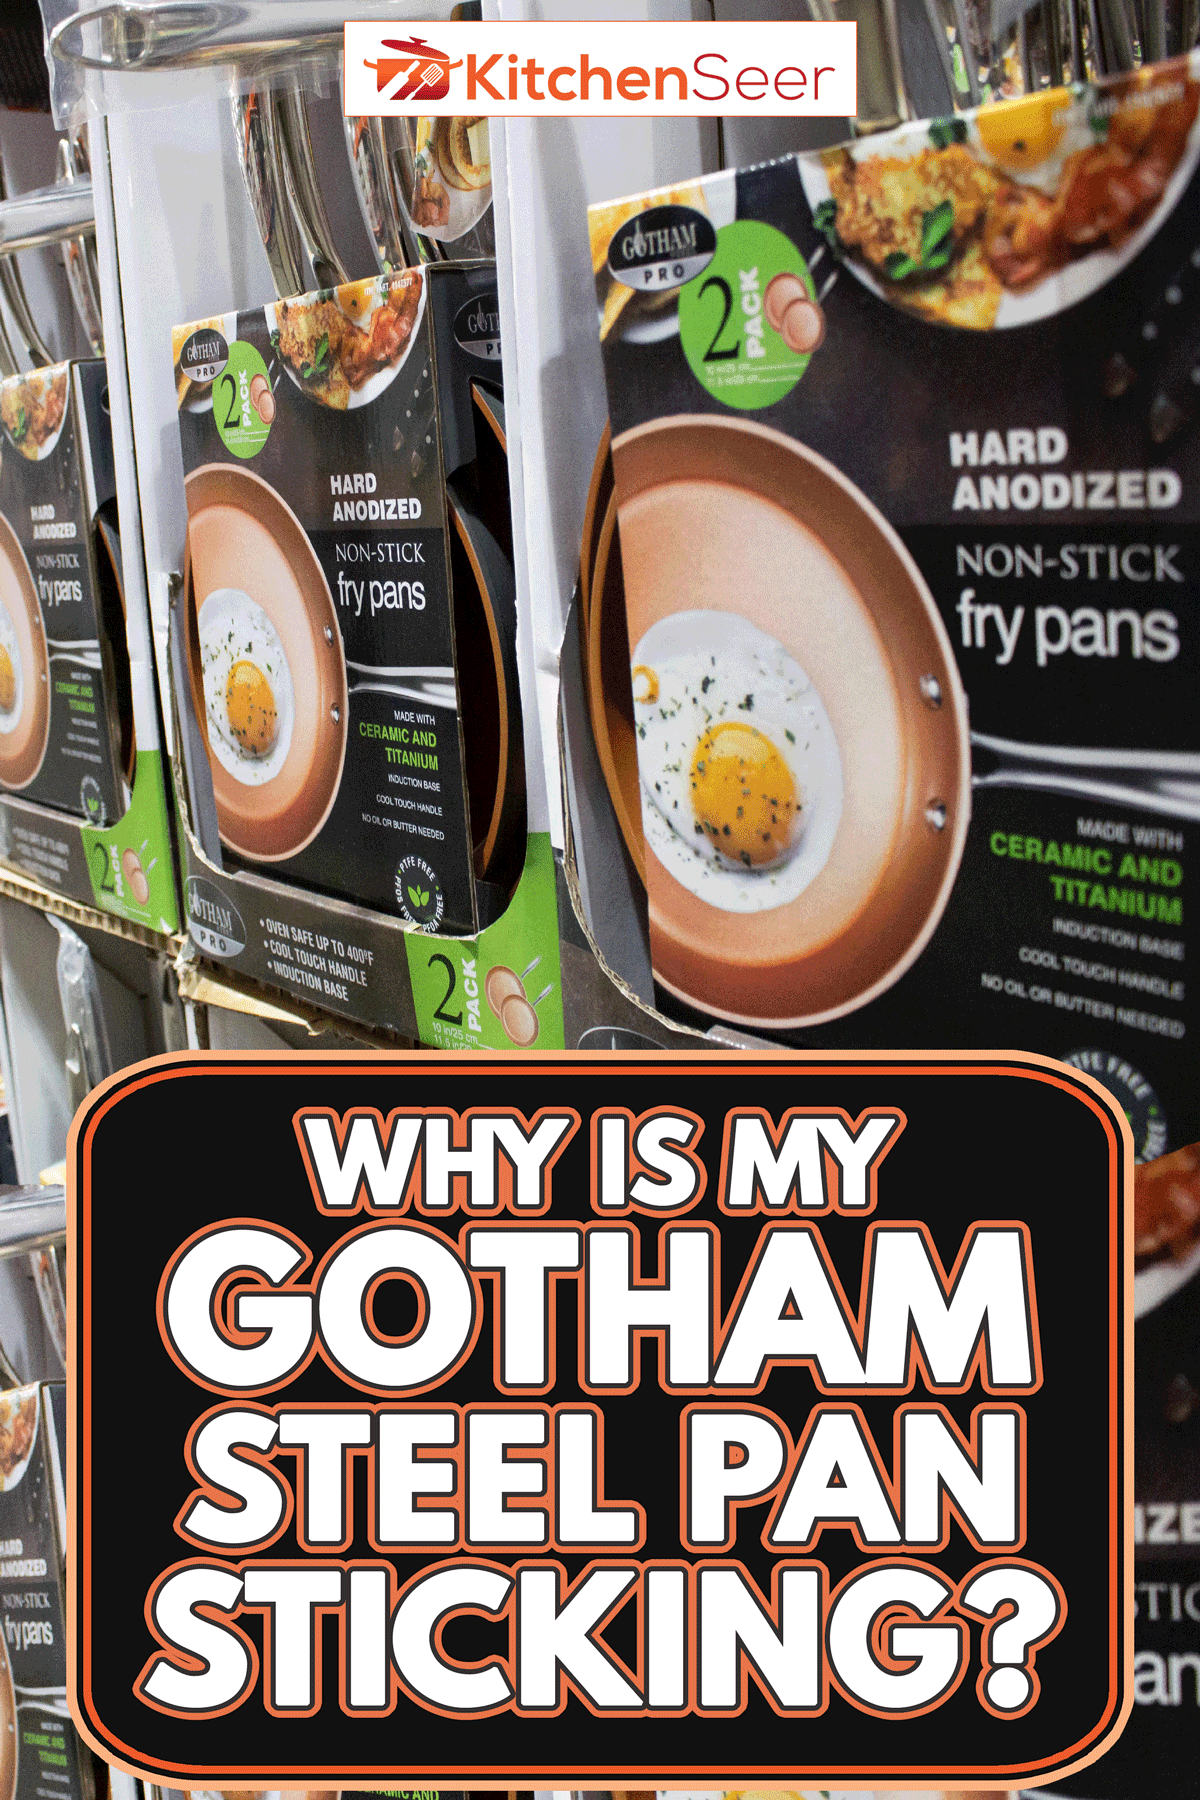 Packages of gotham steel non-stick pans on display, Why Is My Gotham Steel Pan Sticking?